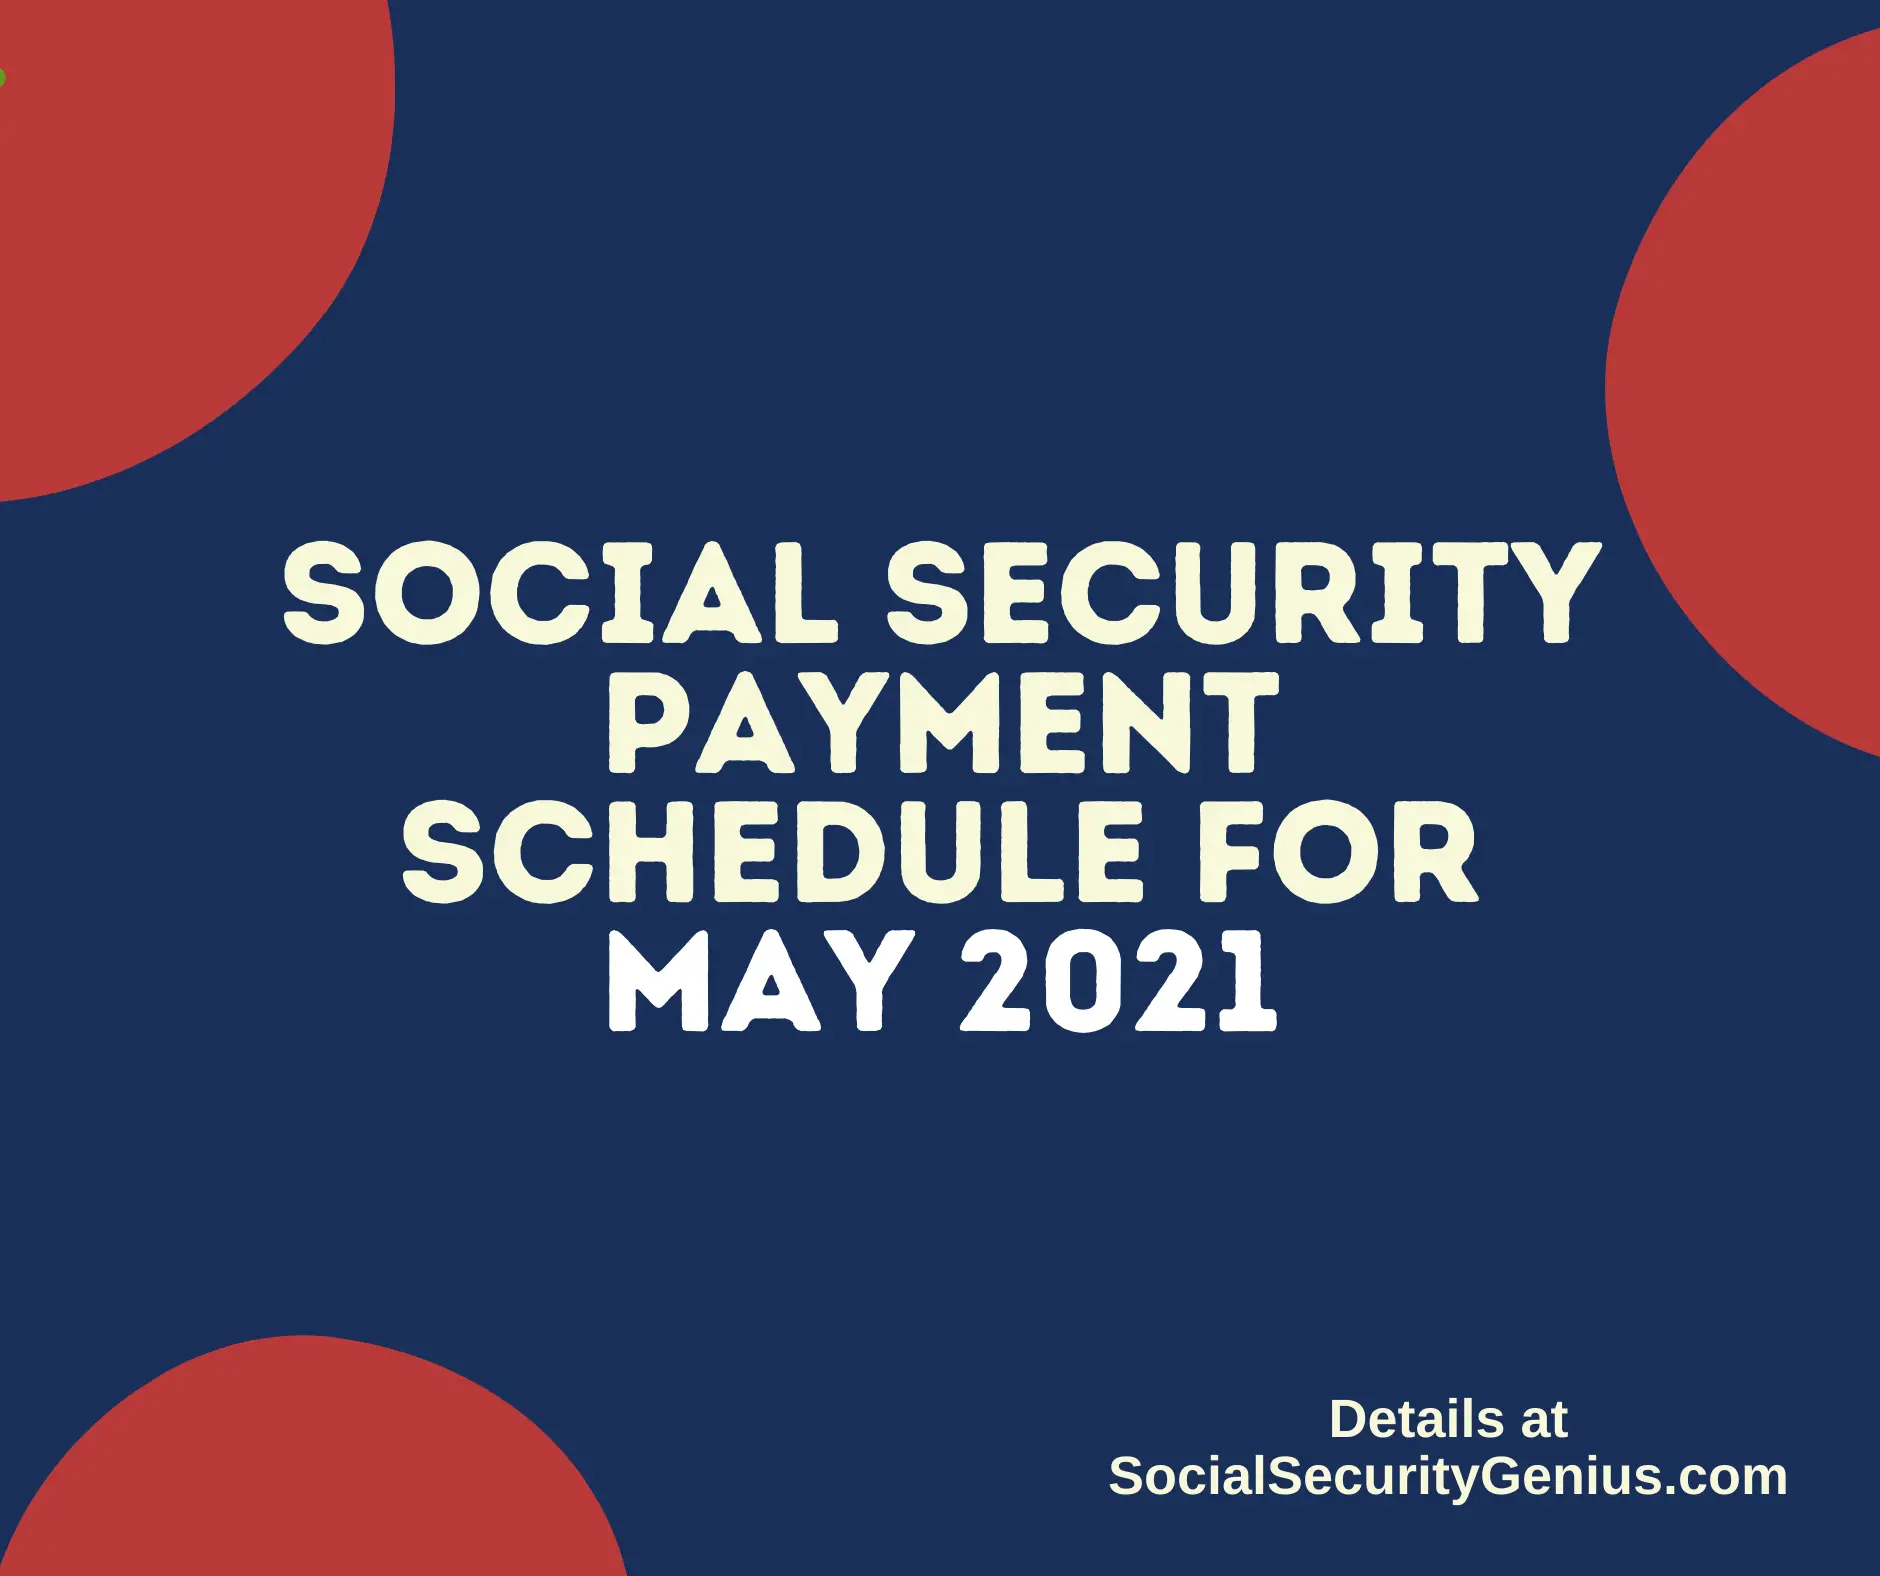 "Social Security Payment Schedule May 2021"